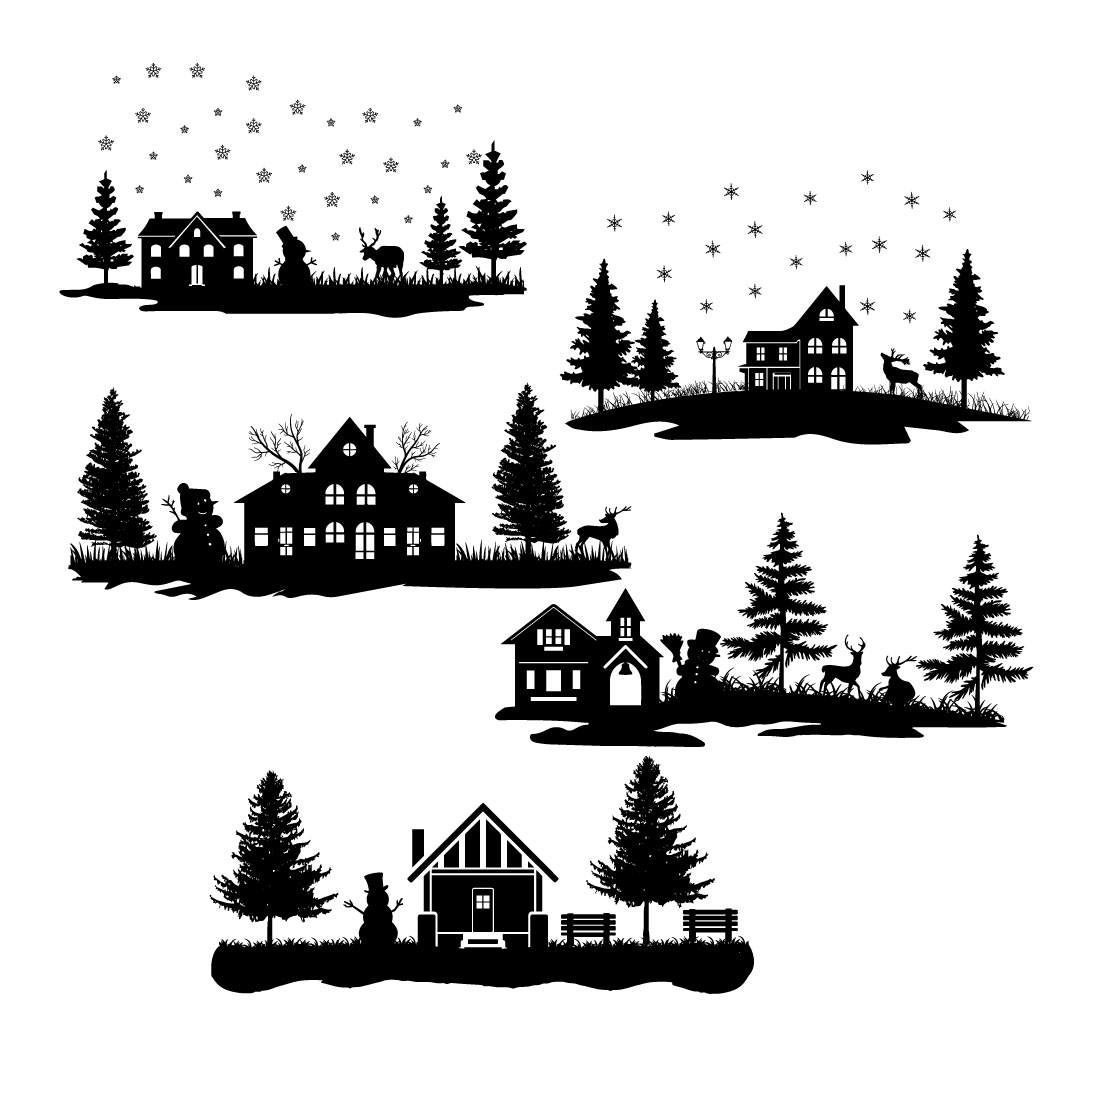 Collection of amazing images of Christmas houses silhouettes